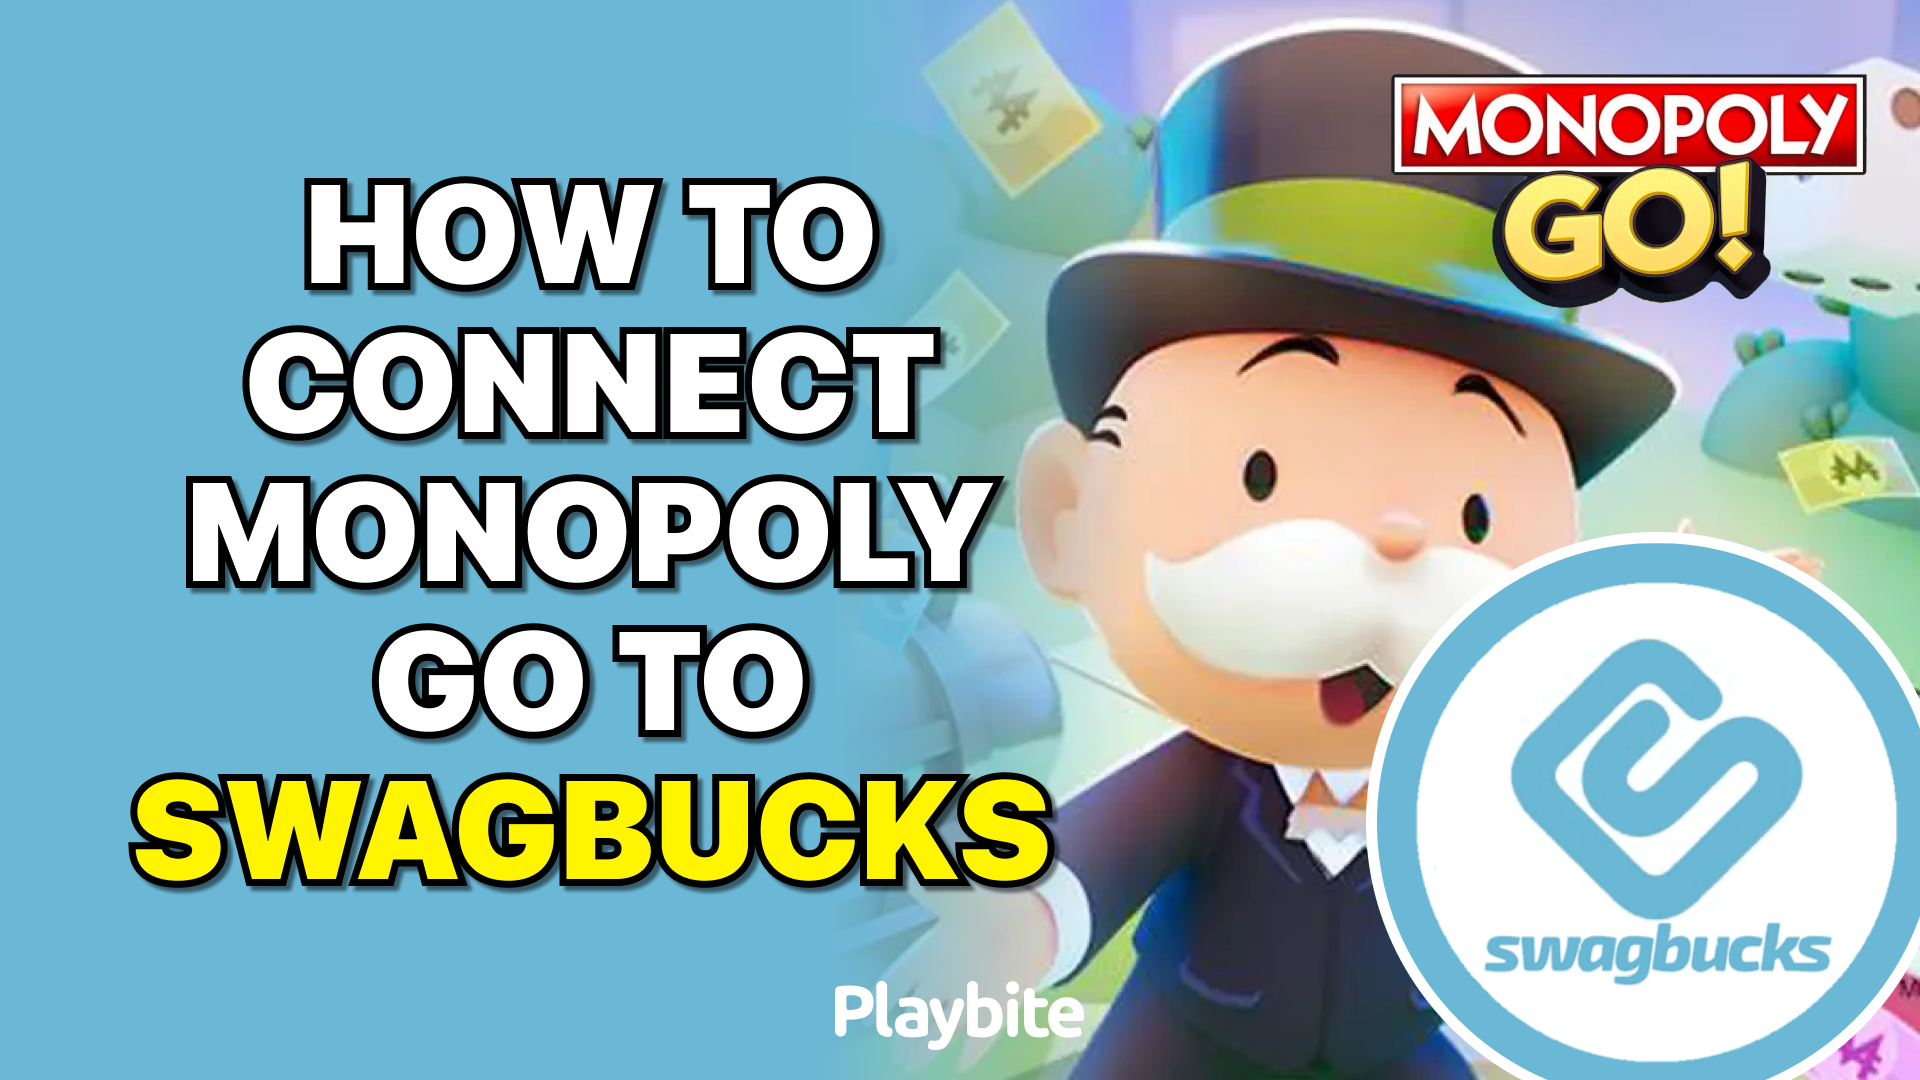 How to Connect Monopoly Go to Swagbucks